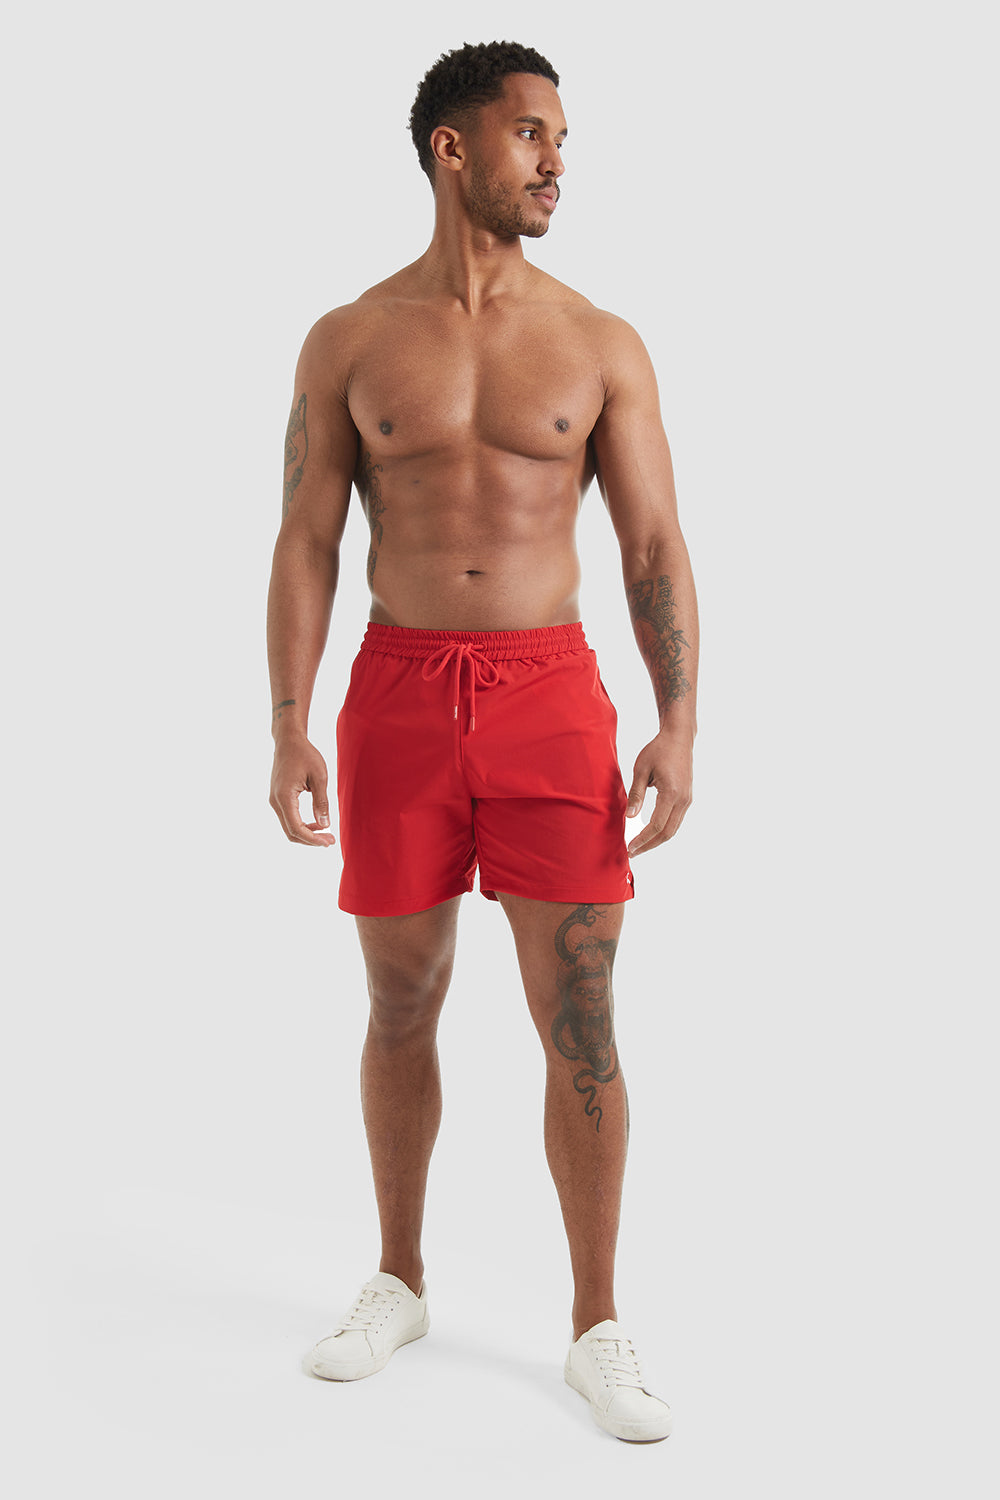 Swim Shorts in Red - TAILORED ATHLETE - ROW